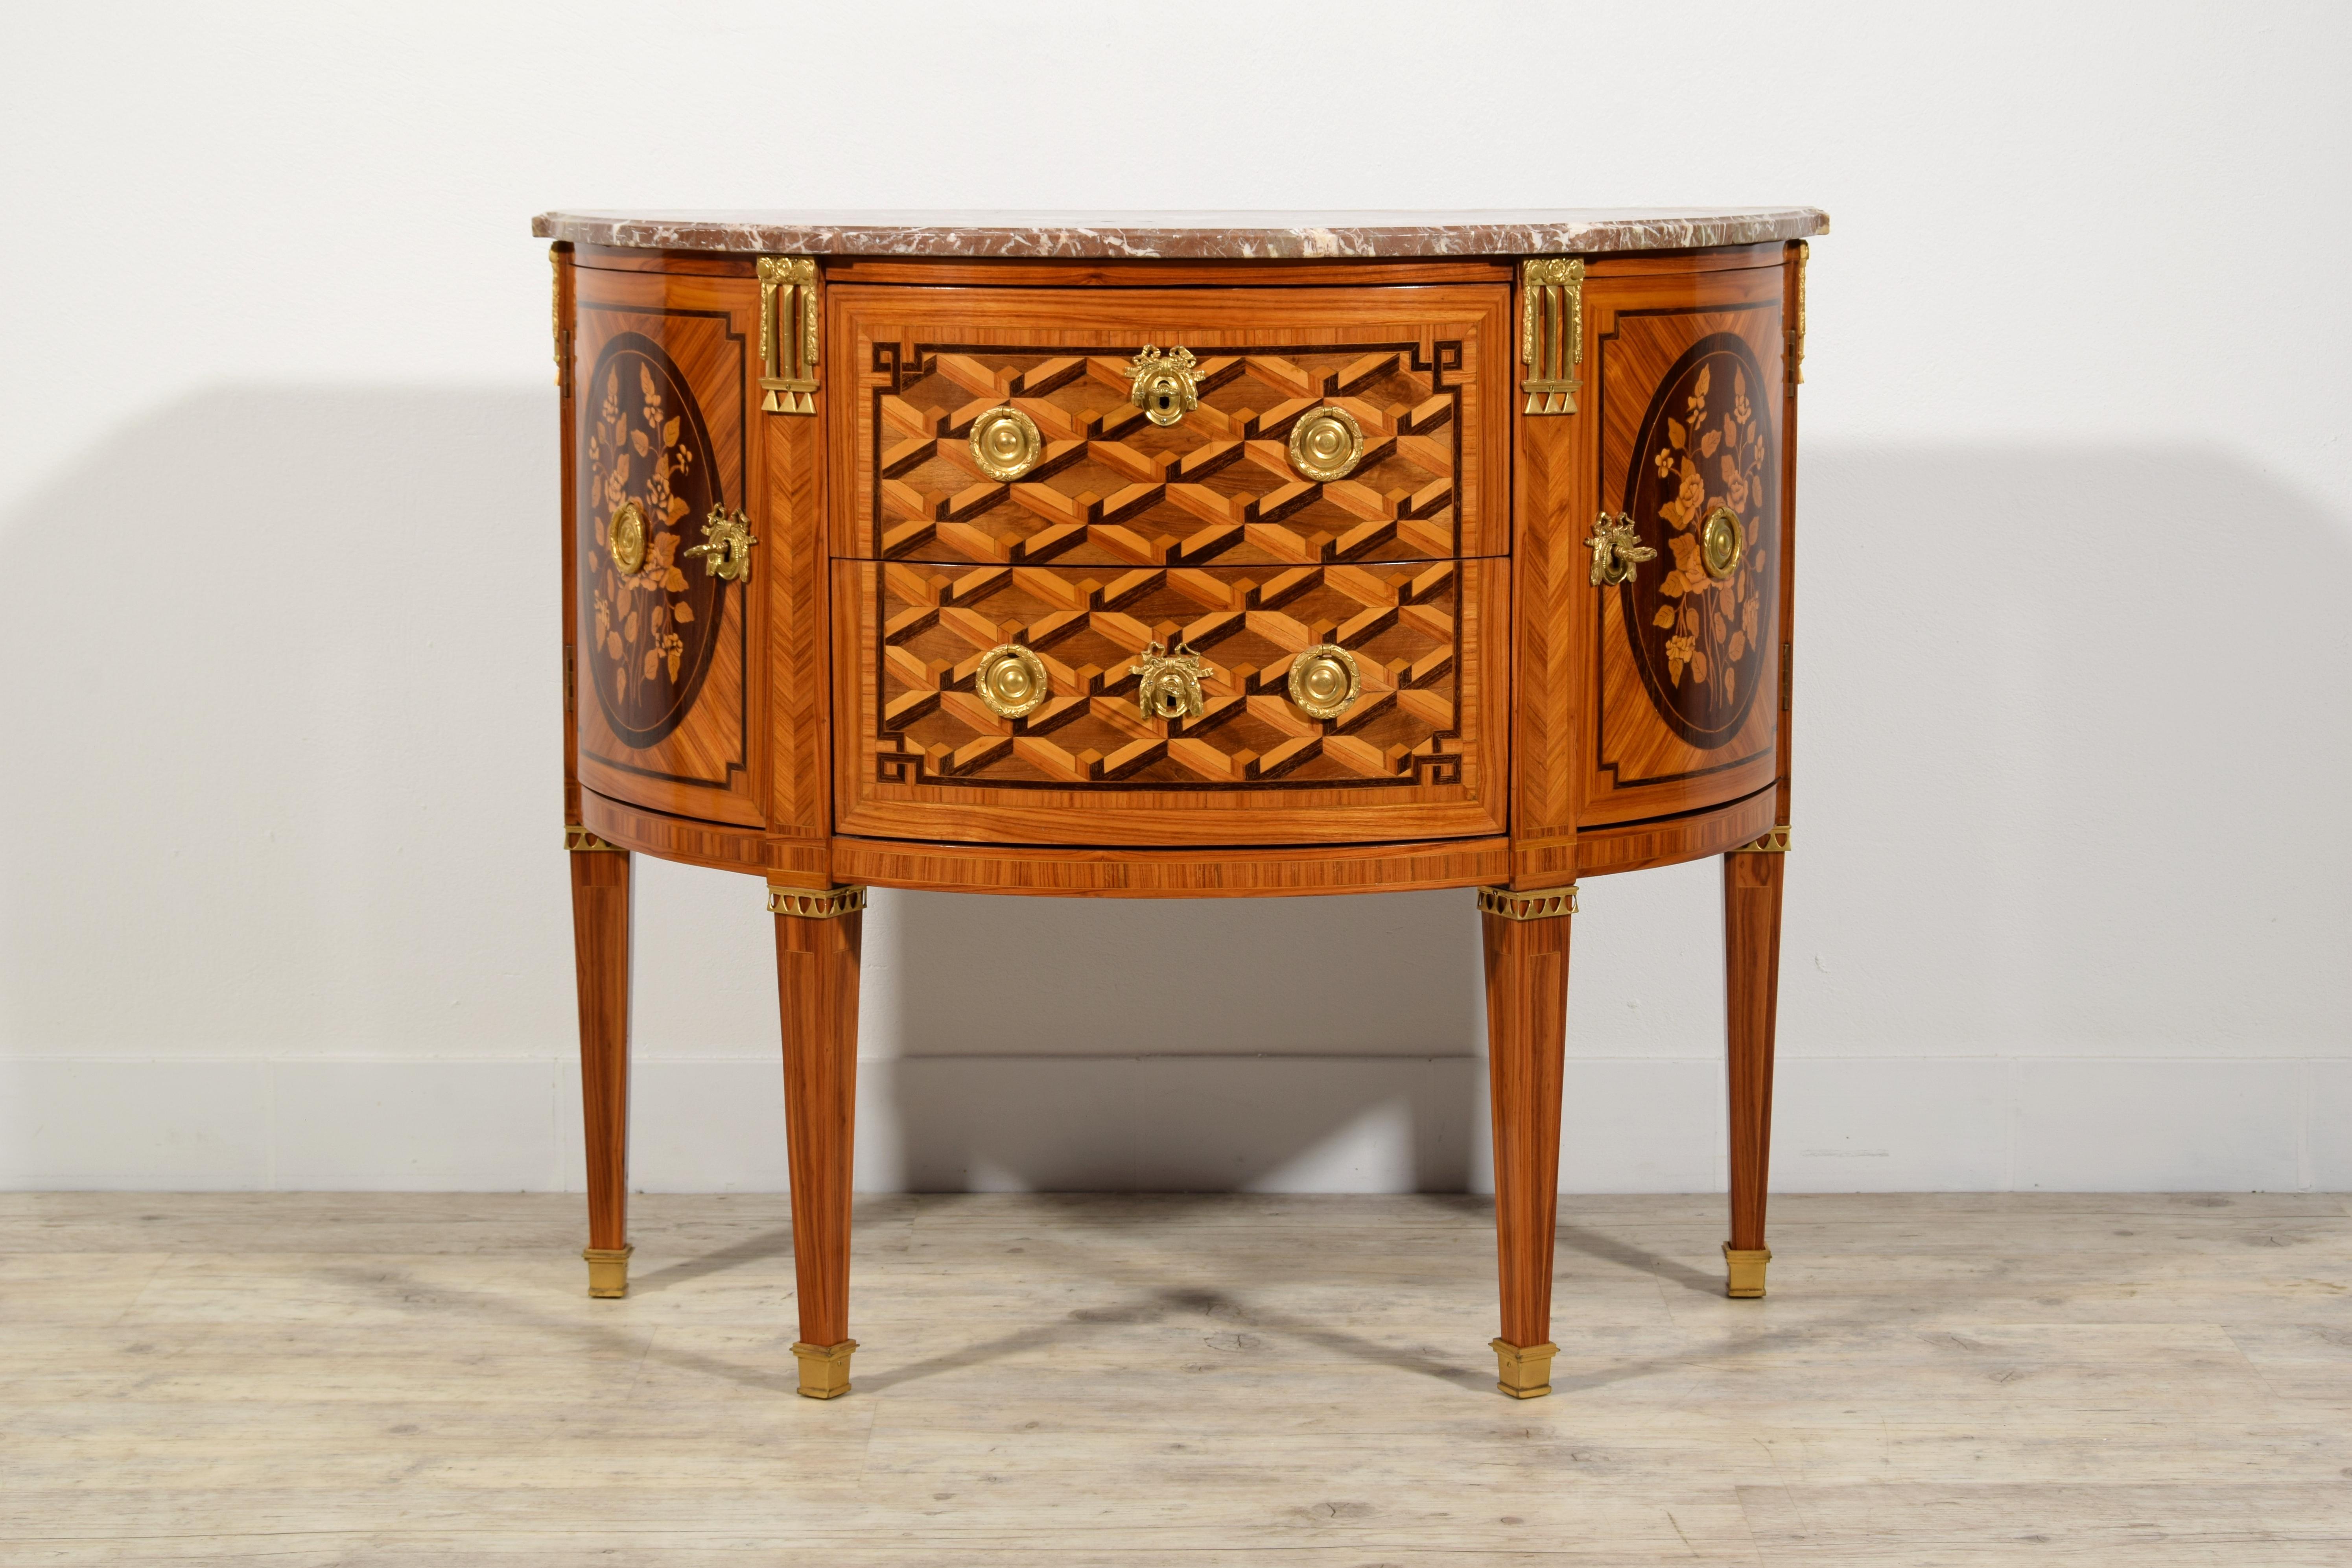 19th Century, Louis XVI Half Moon Veneered and Inlaid Wood French Commode

The elegant crescent commode was made in the first half of the 19th century in France. The wooden structure is veneered and finely inlaid with wooden essences with different